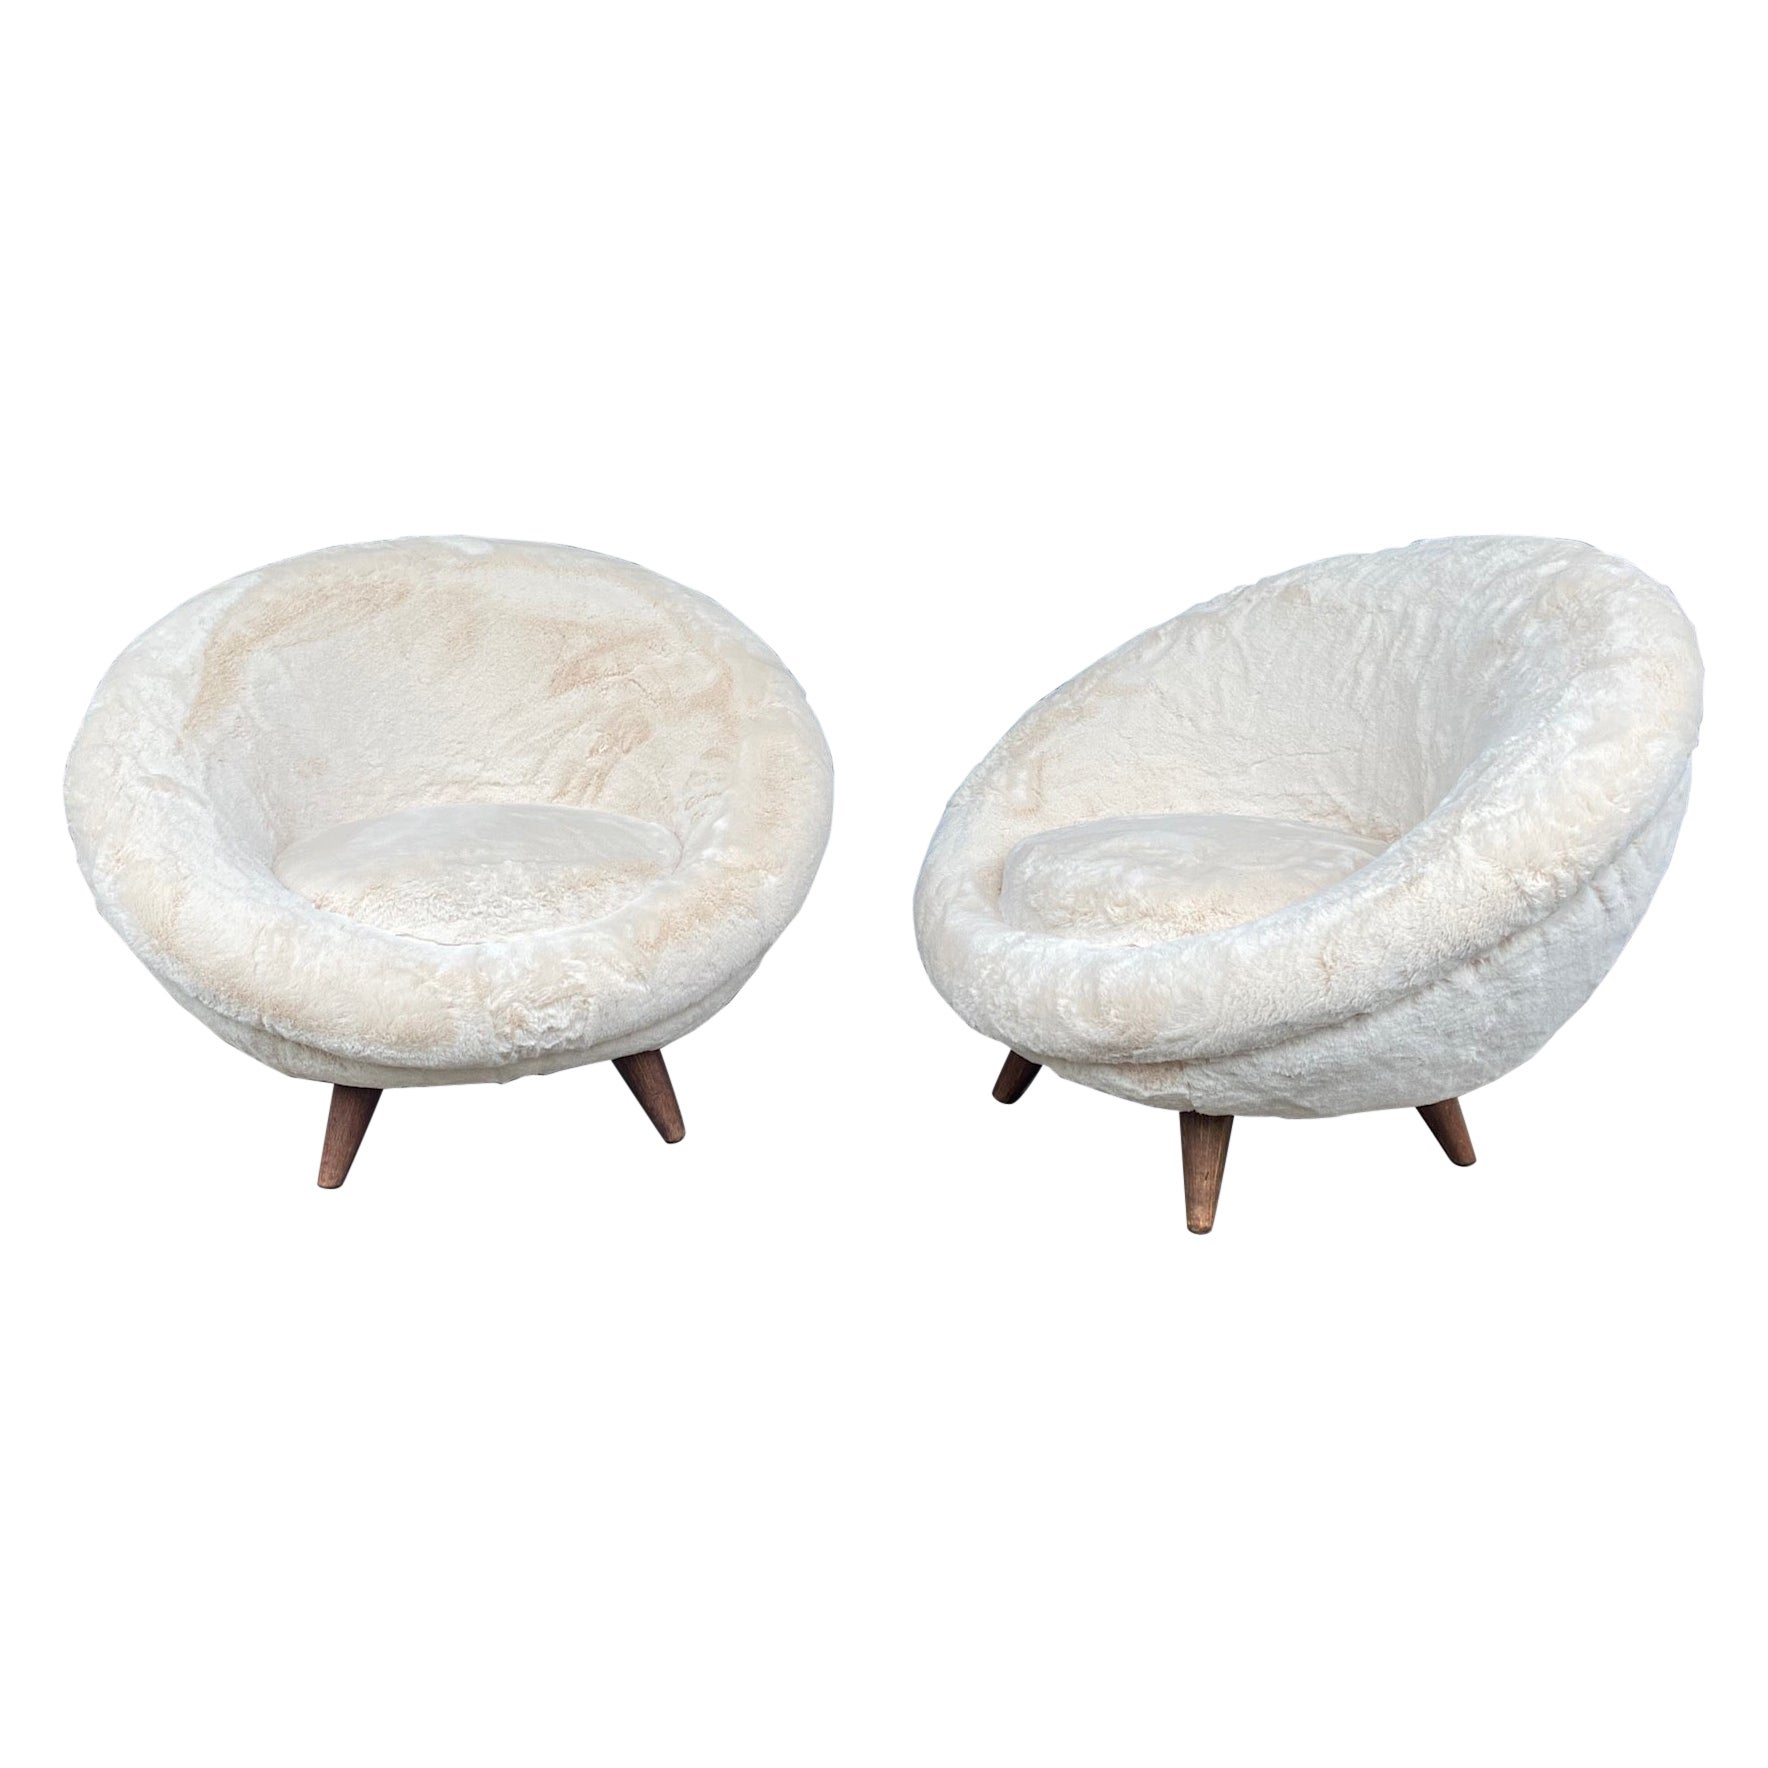 Pair of egg-shaped armchairs, Italy, 1950s